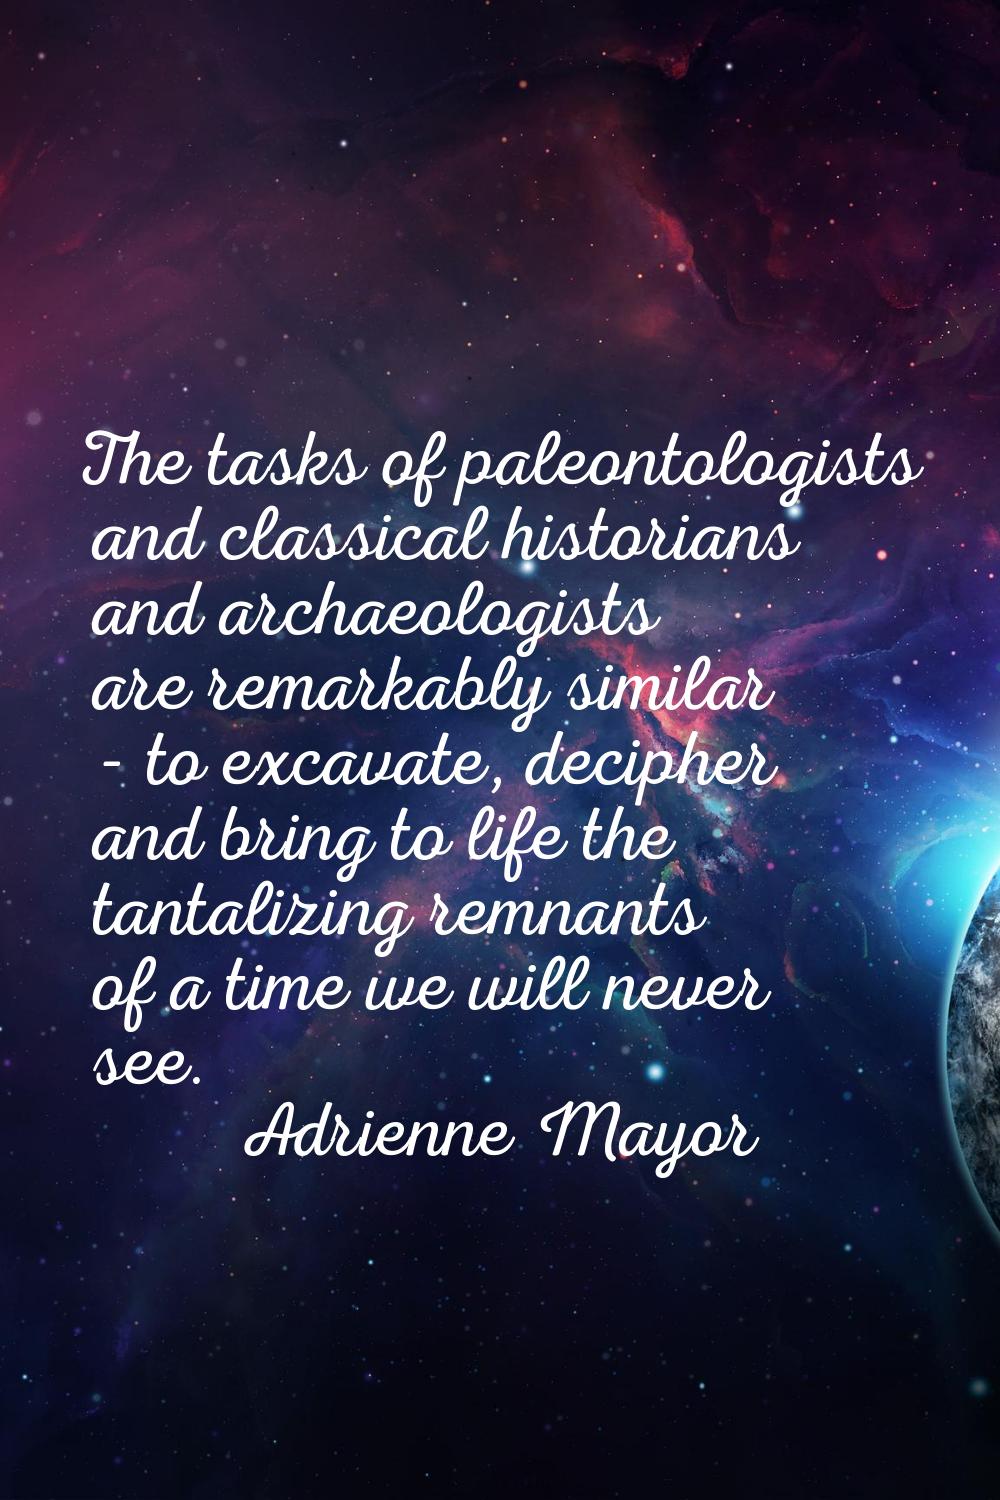 The tasks of paleontologists and classical historians and archaeologists are remarkably similar - t